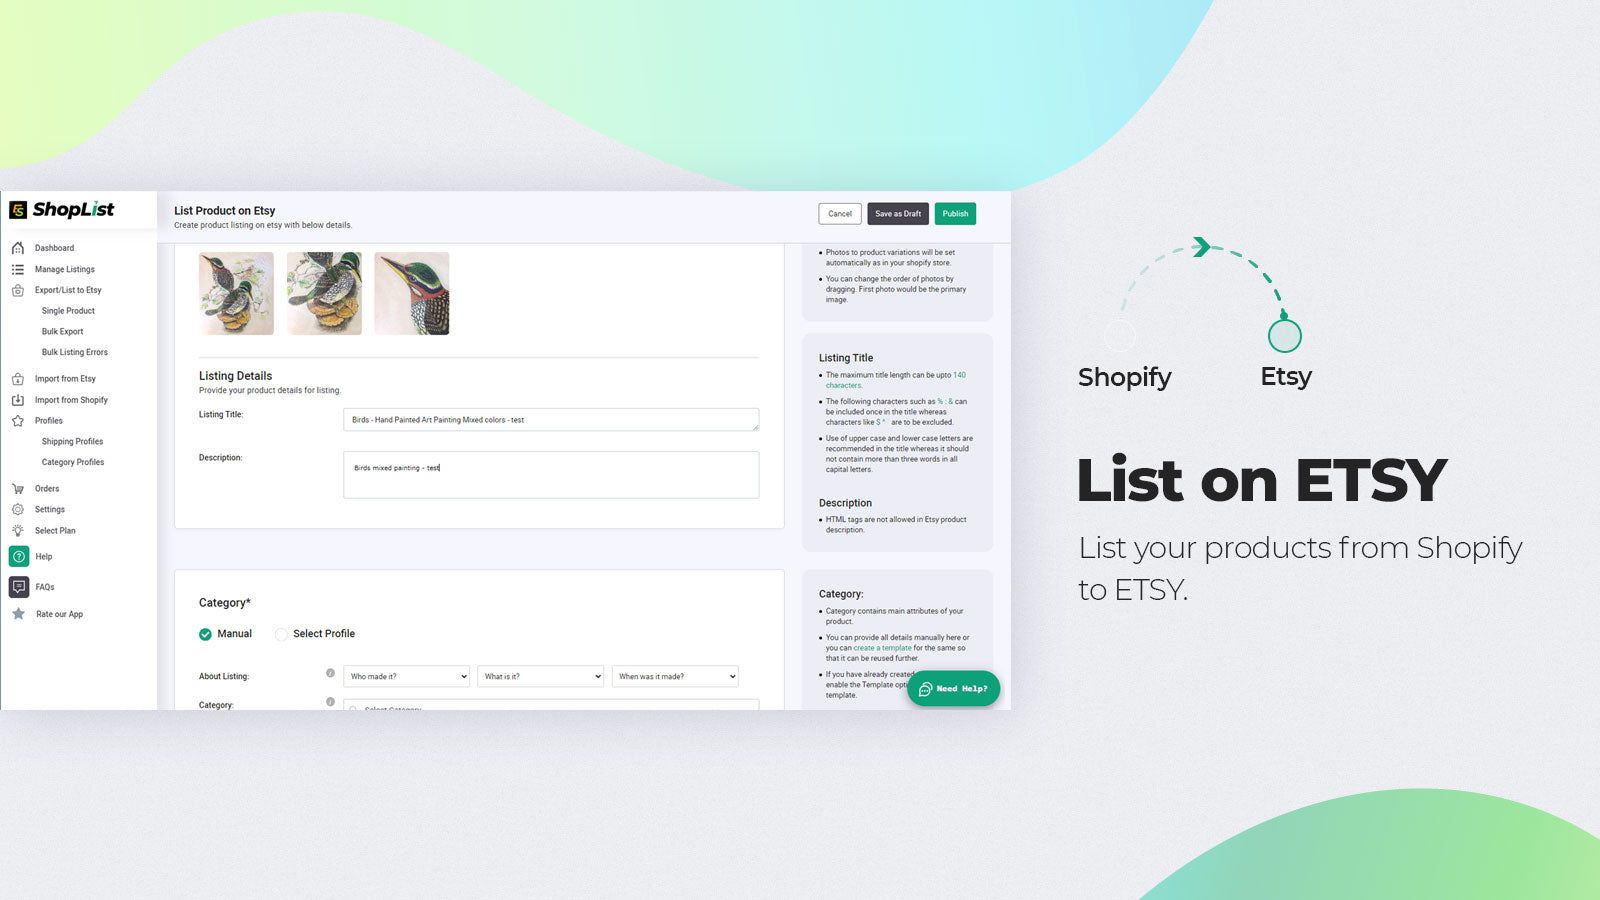 List products from Shopify to ETSY - Etsy upload